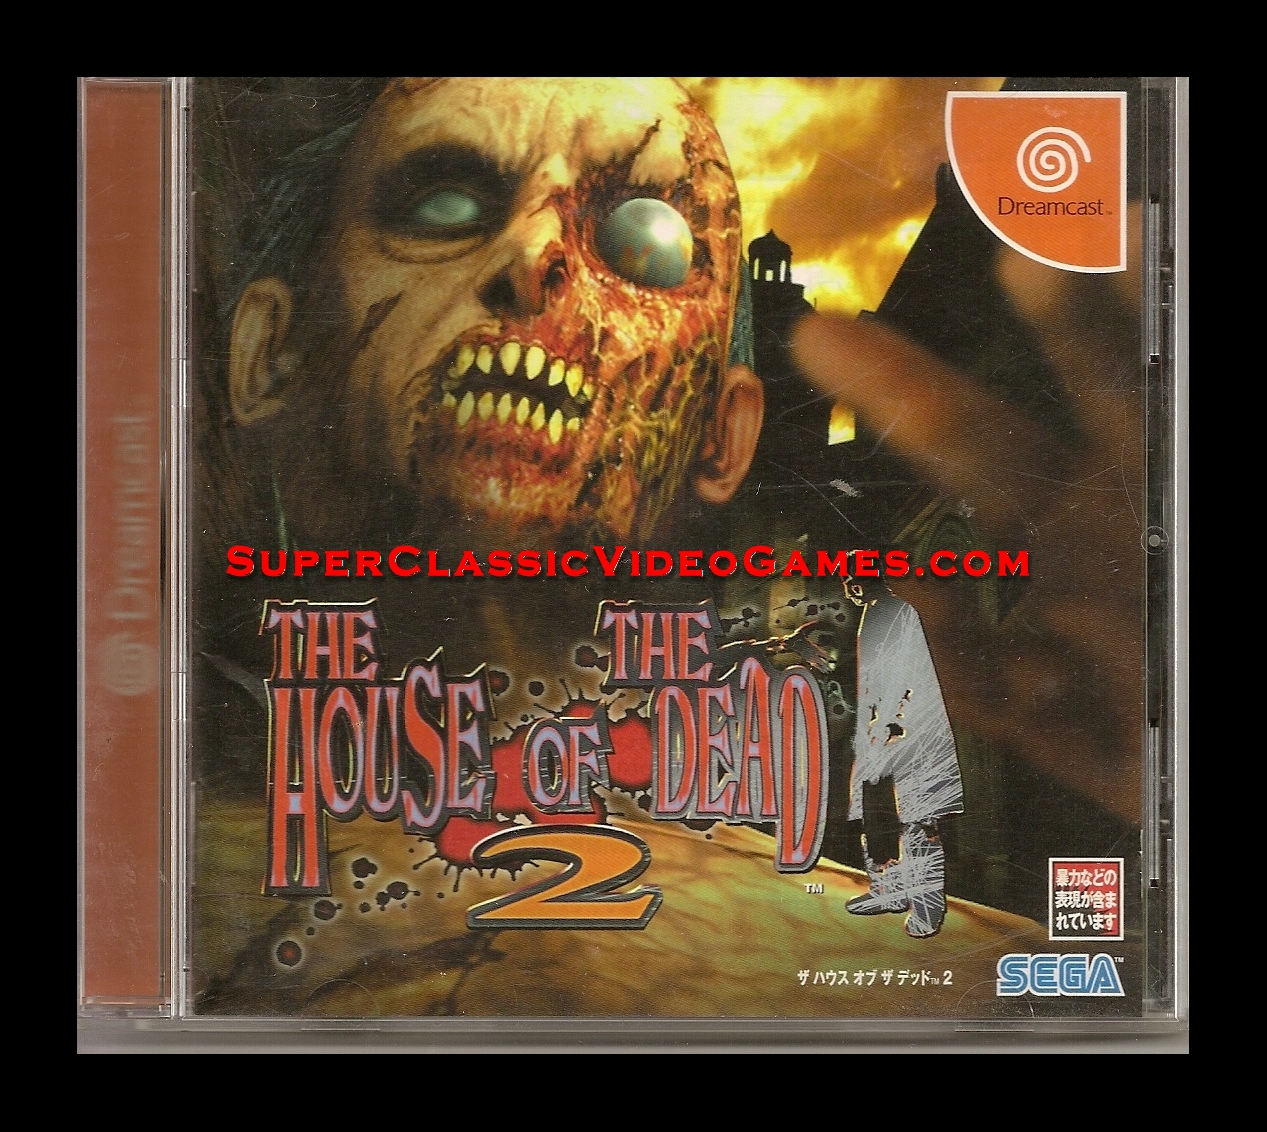 dreamcast house of the dead 2